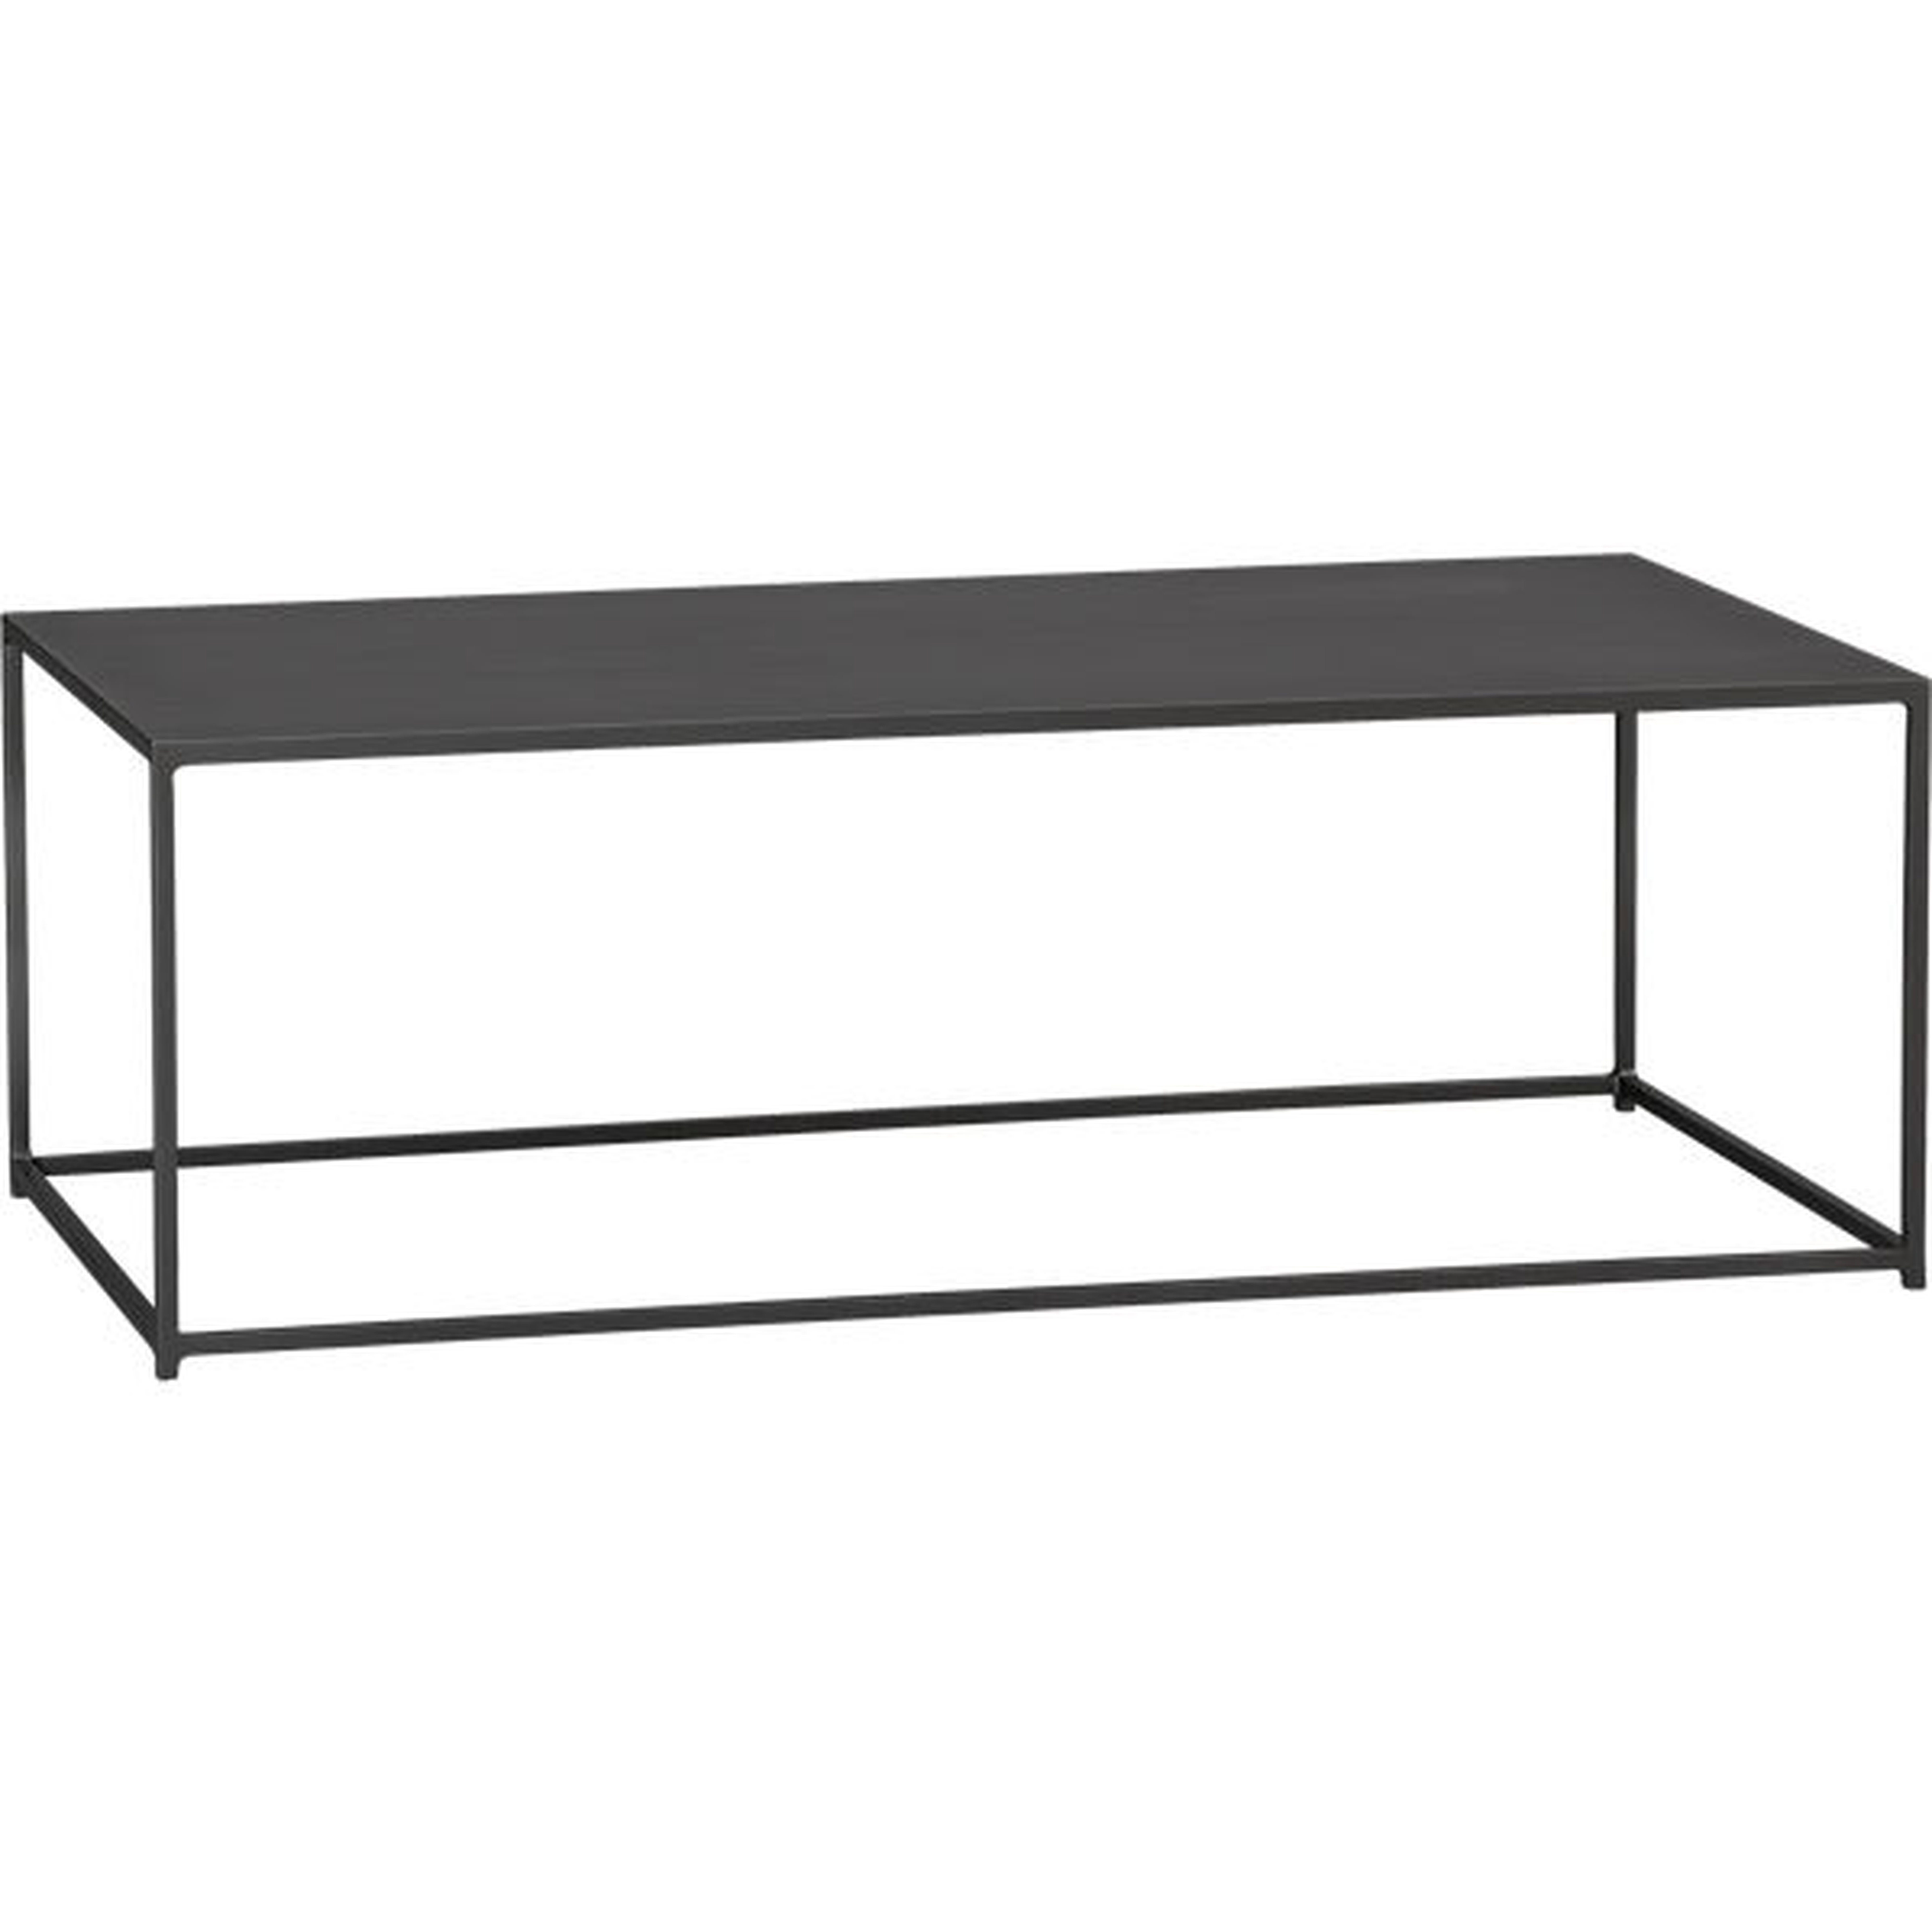 Mill coffee table - CB2